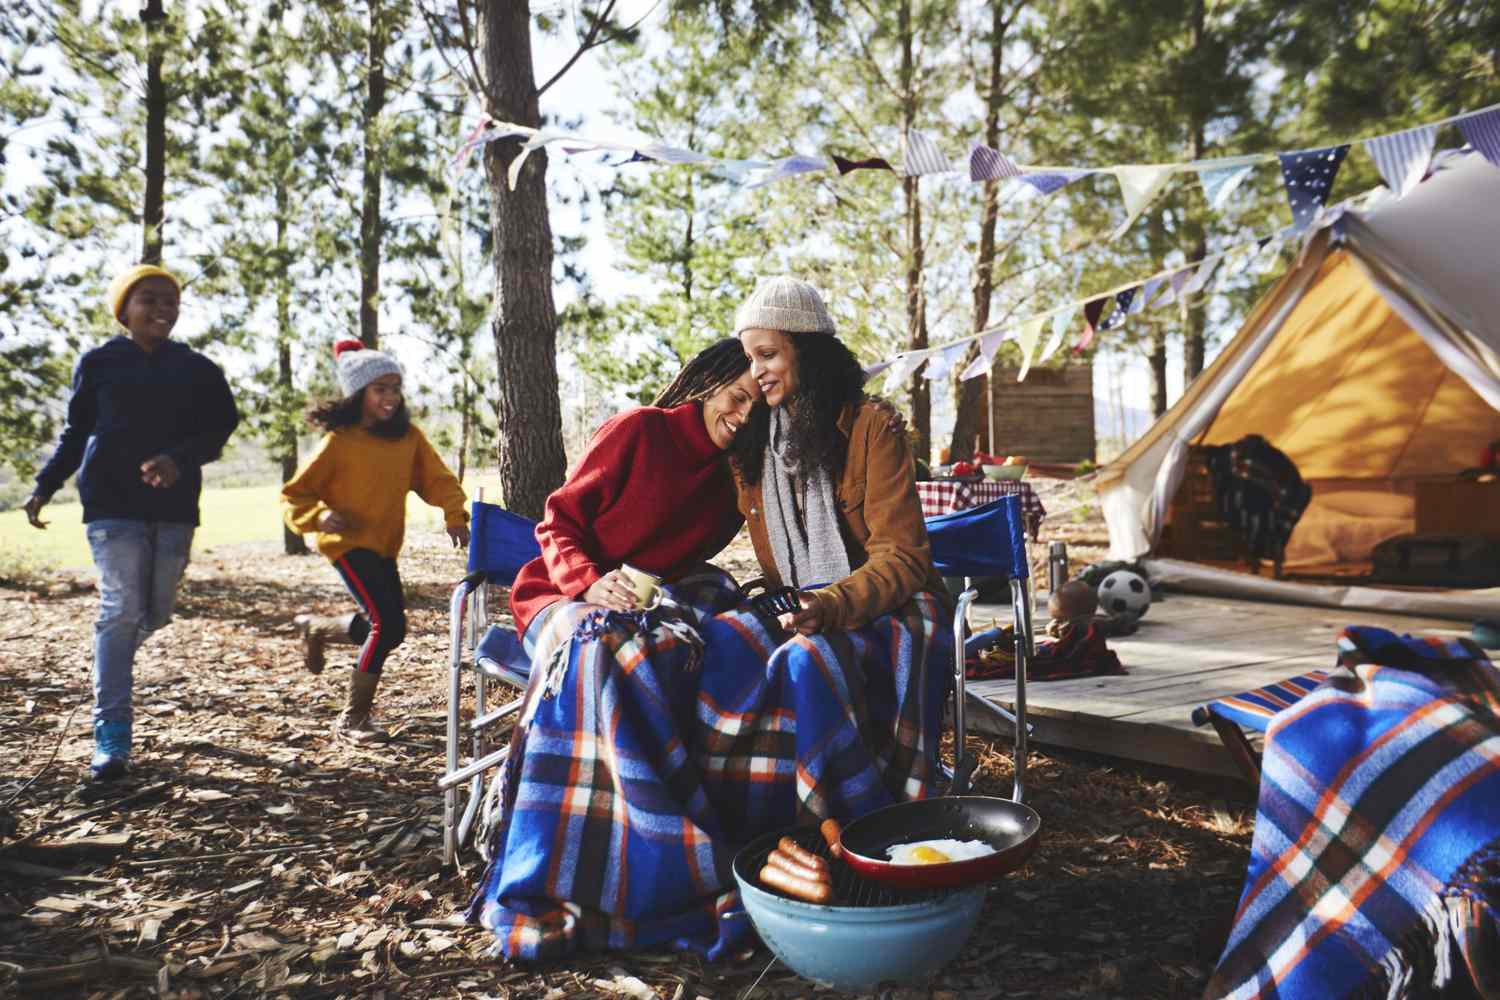 Happy lesbian couple with kids relaxing at campsite in woods